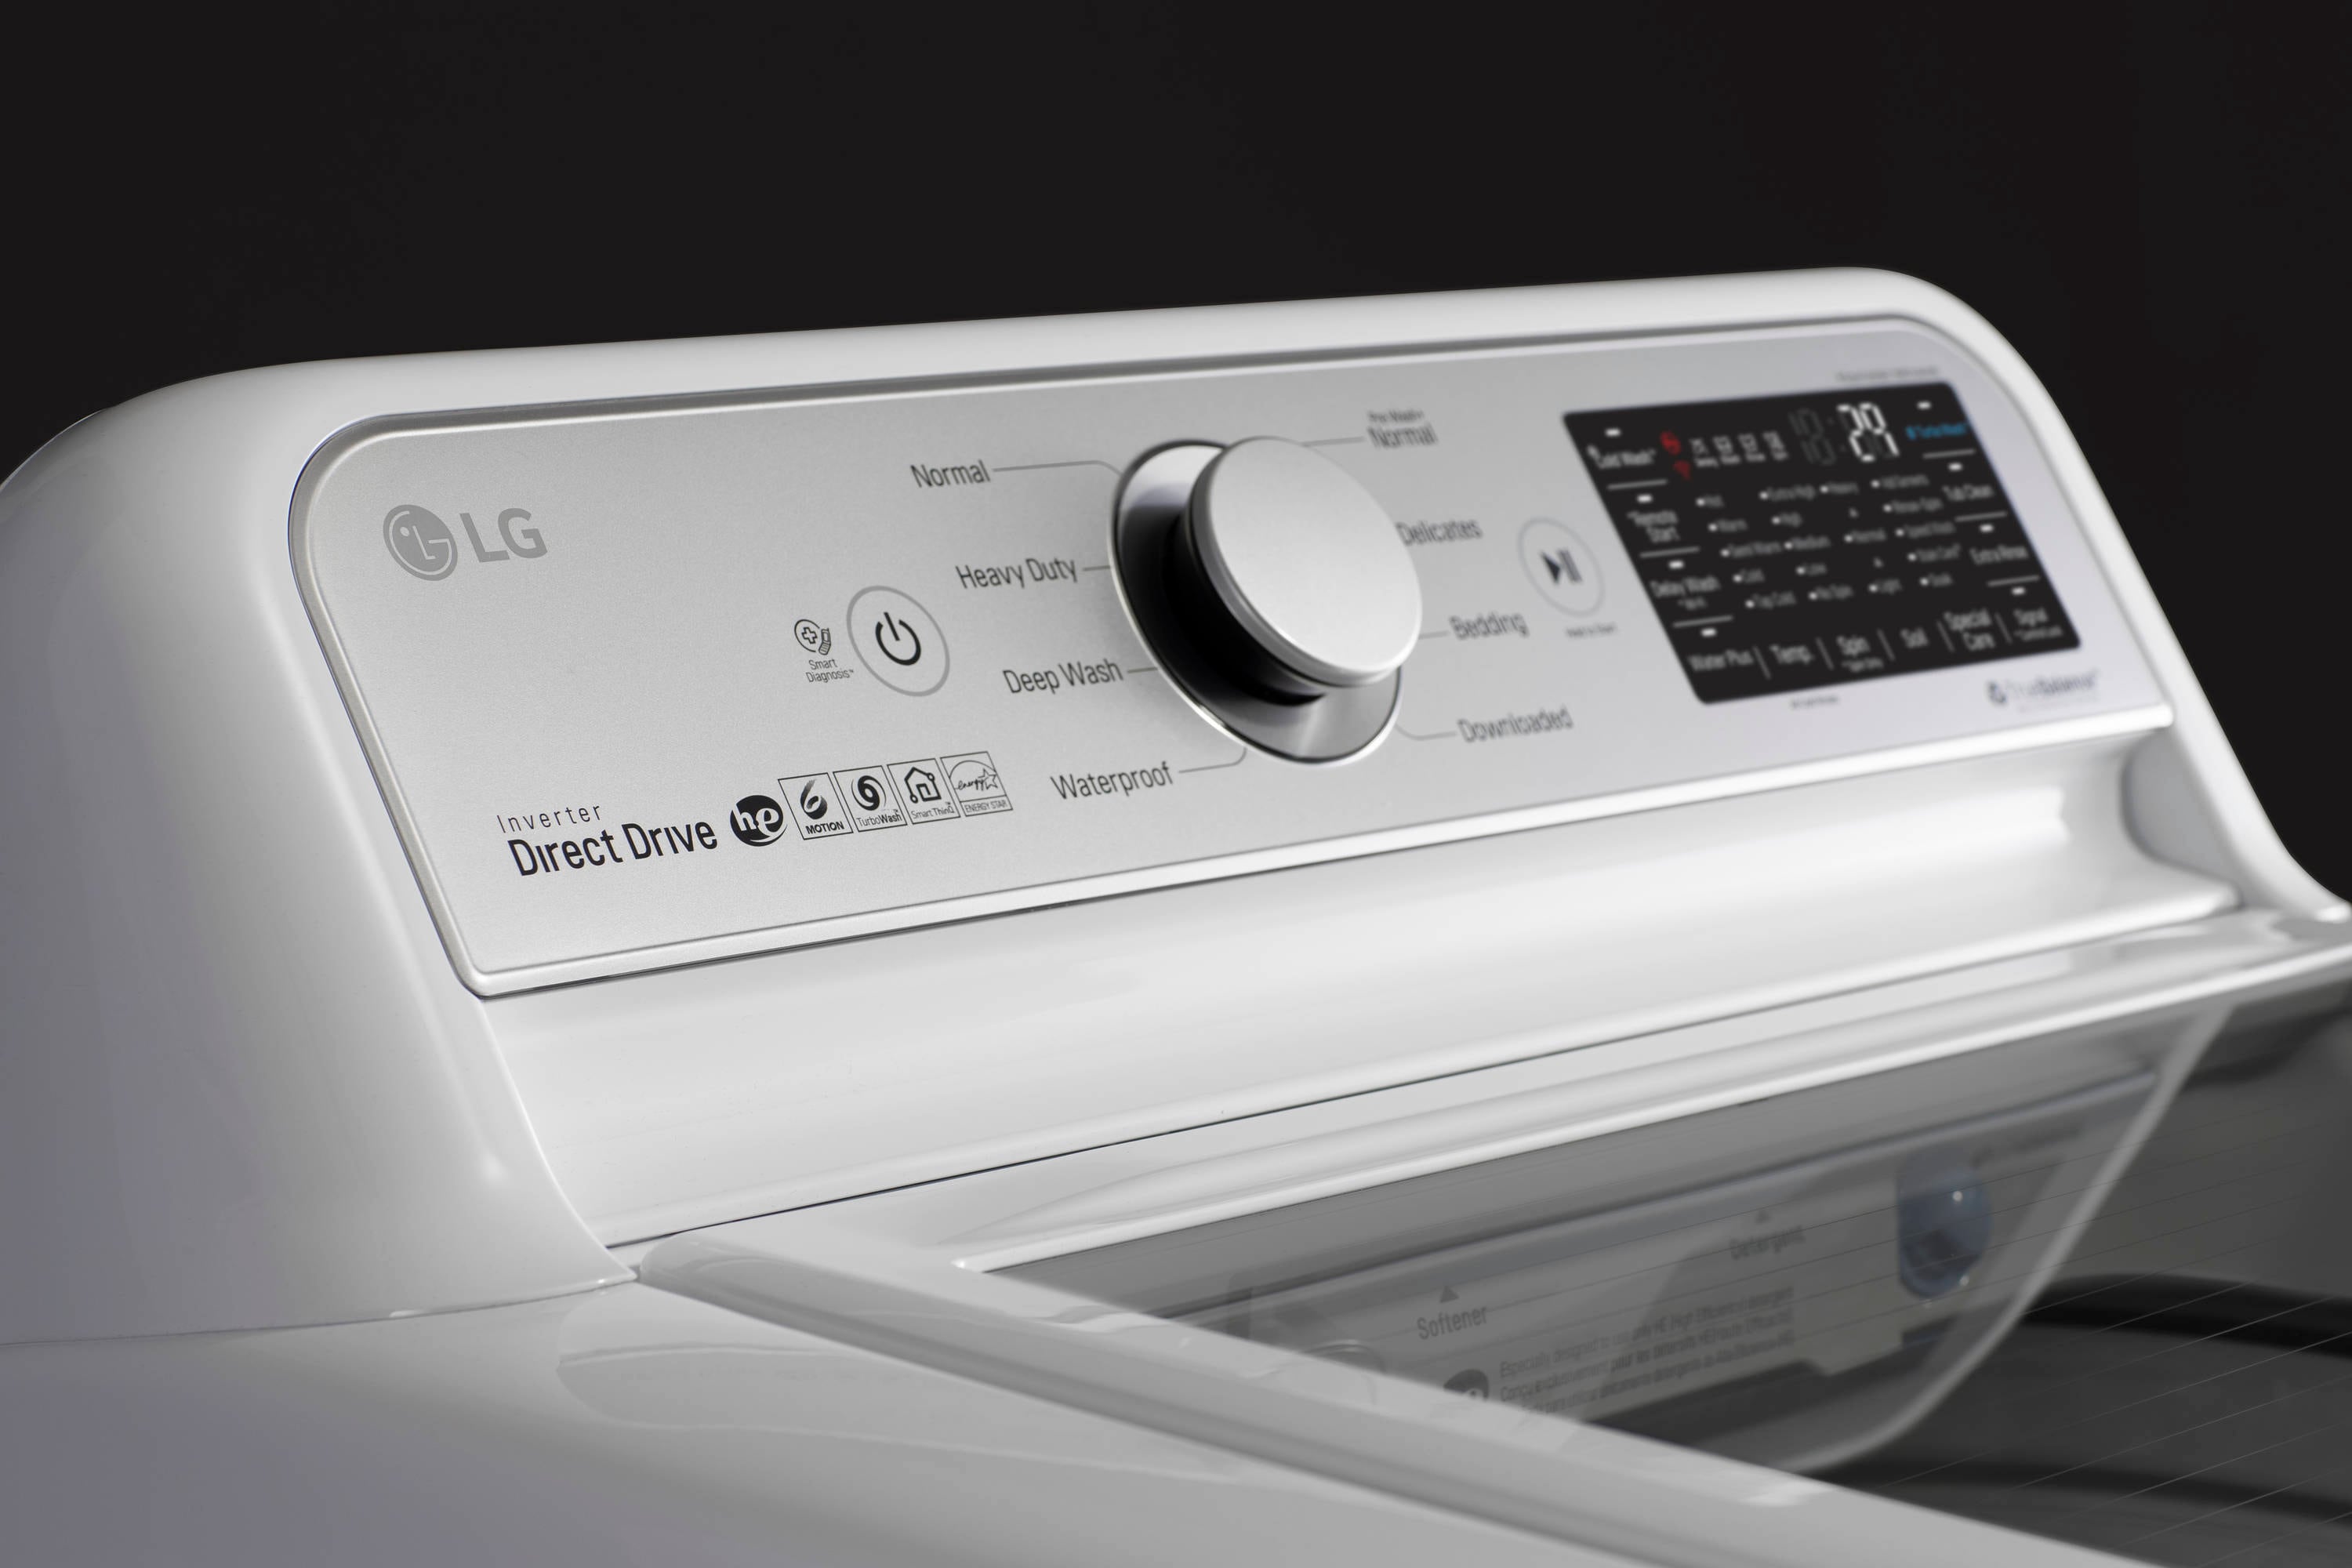 LG 27 in. 5.5 cu. ft. Smart Top Load Washer with TurboWash3D Technology,  Allergiene, Sanitize & Steam Wash Cycle - White